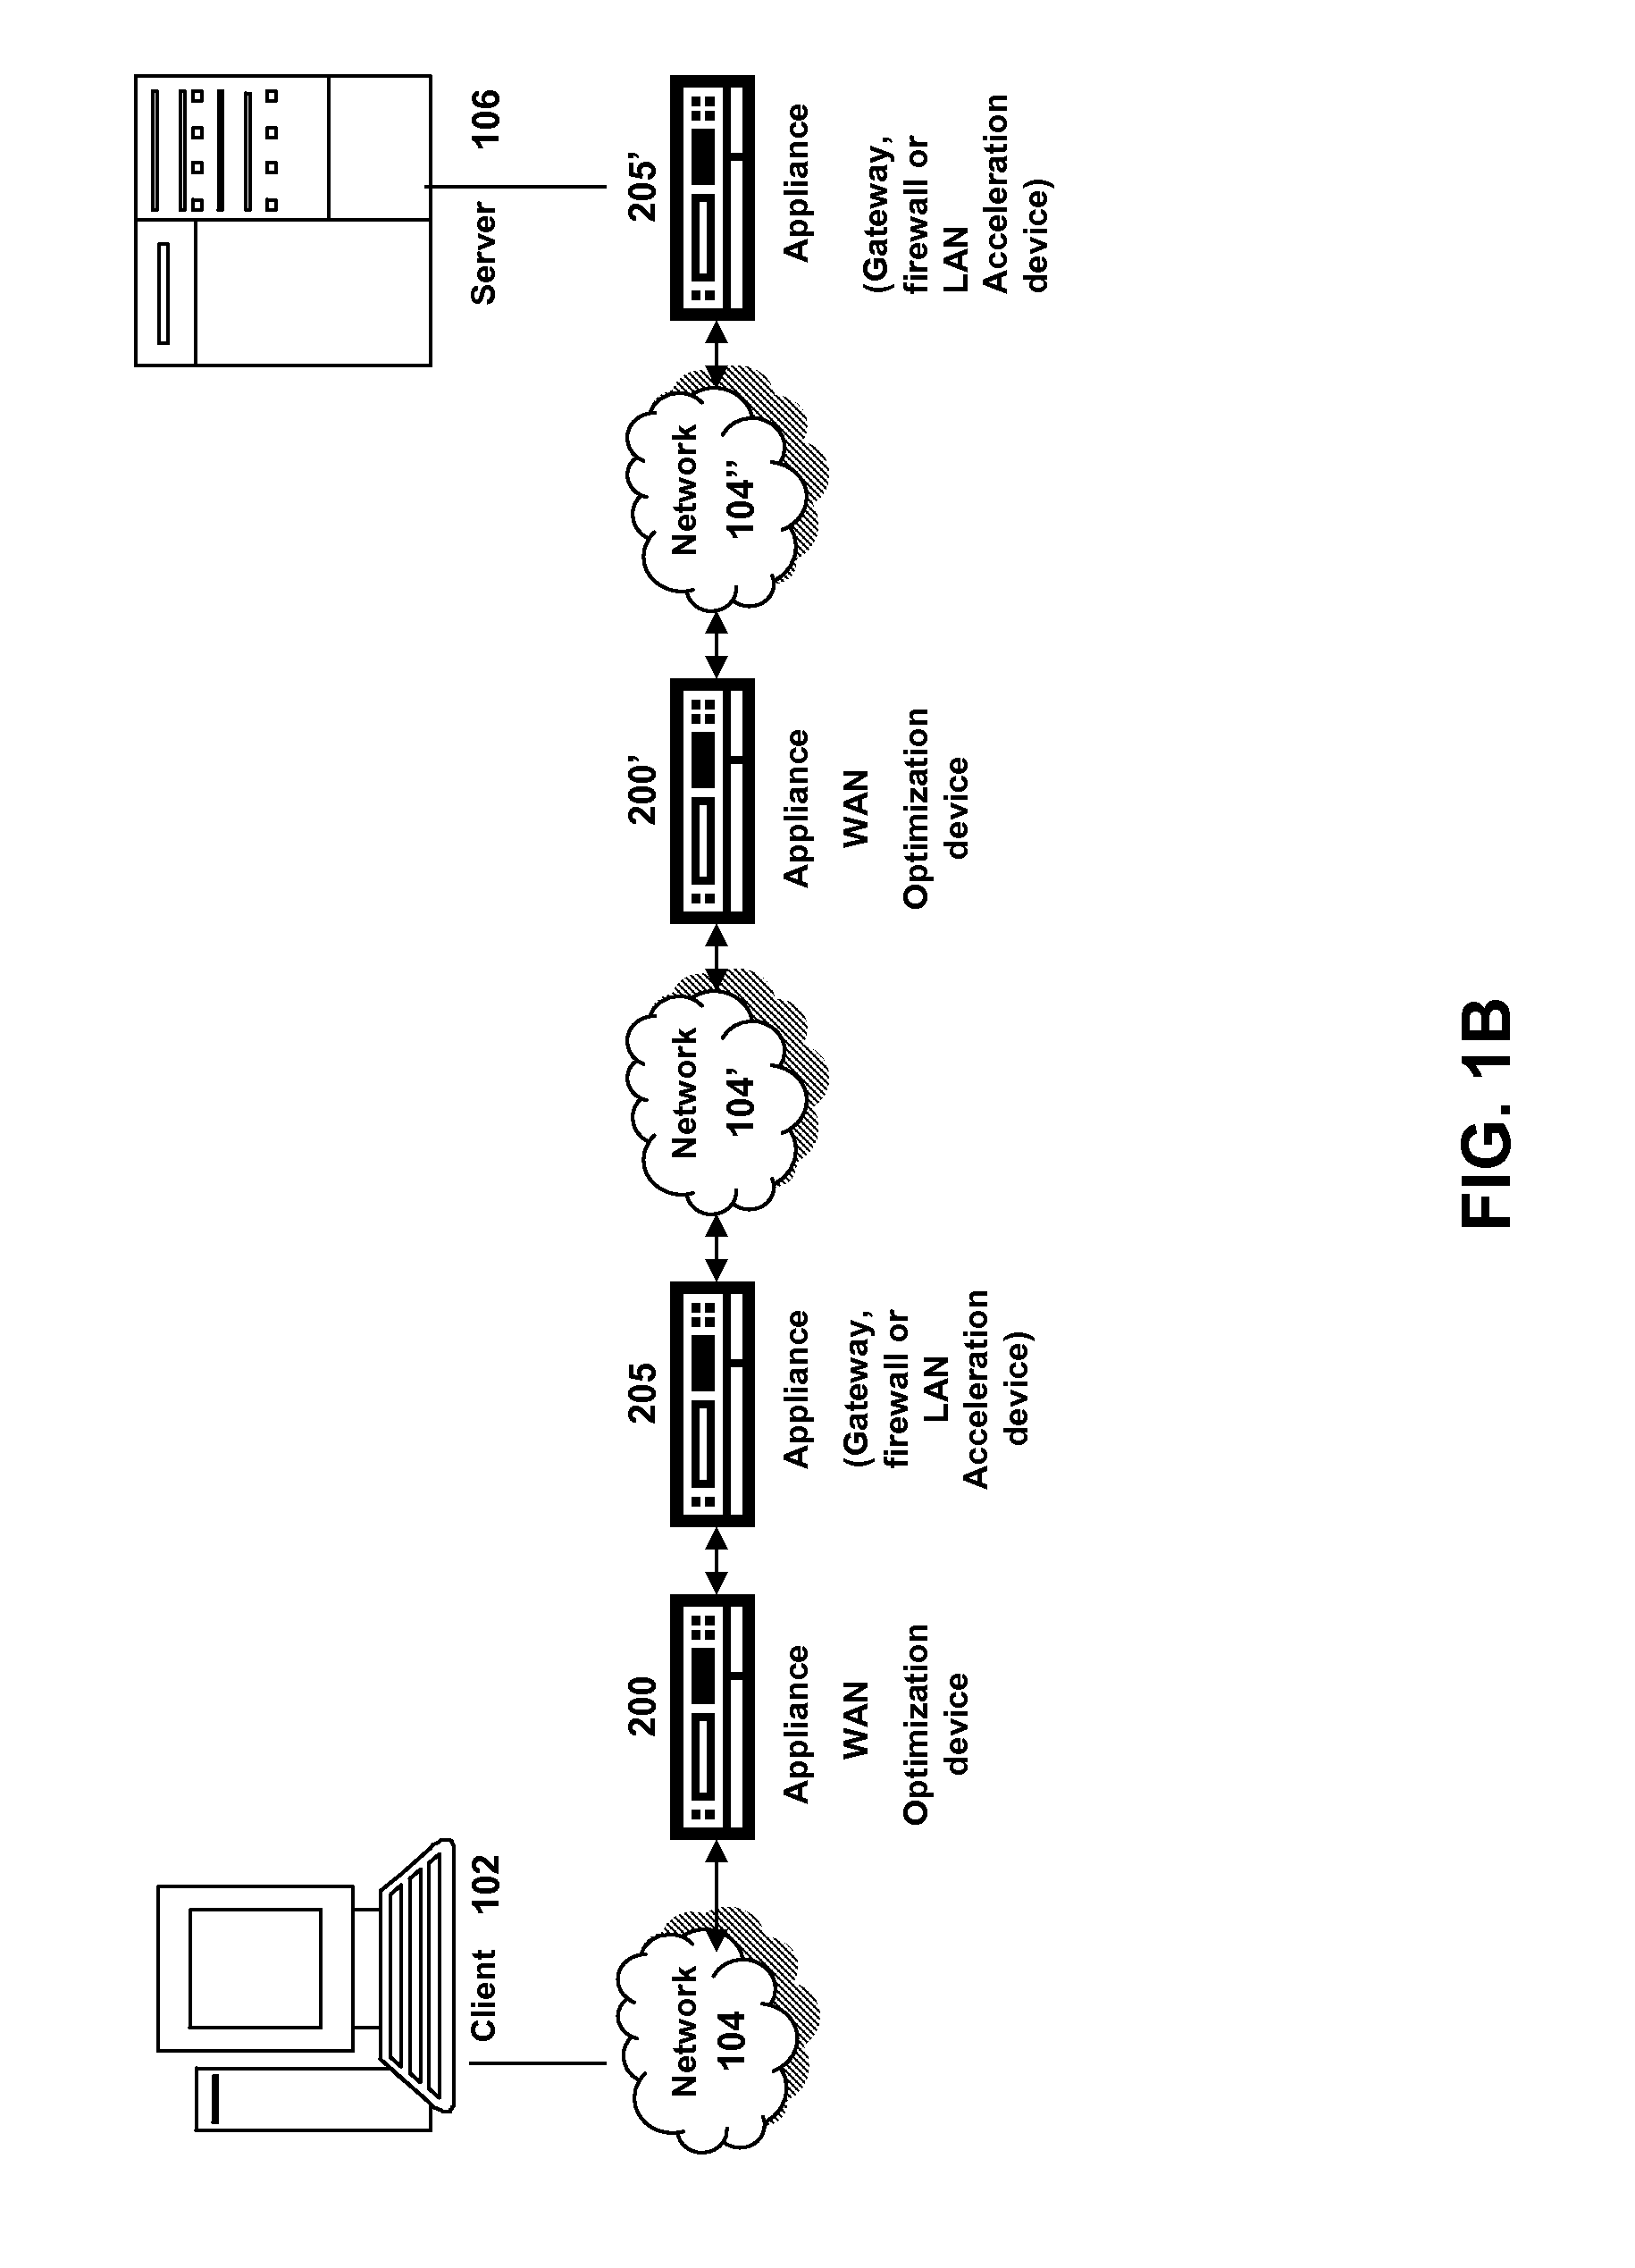 Systems and methods for identifying long matches of data in a compression history